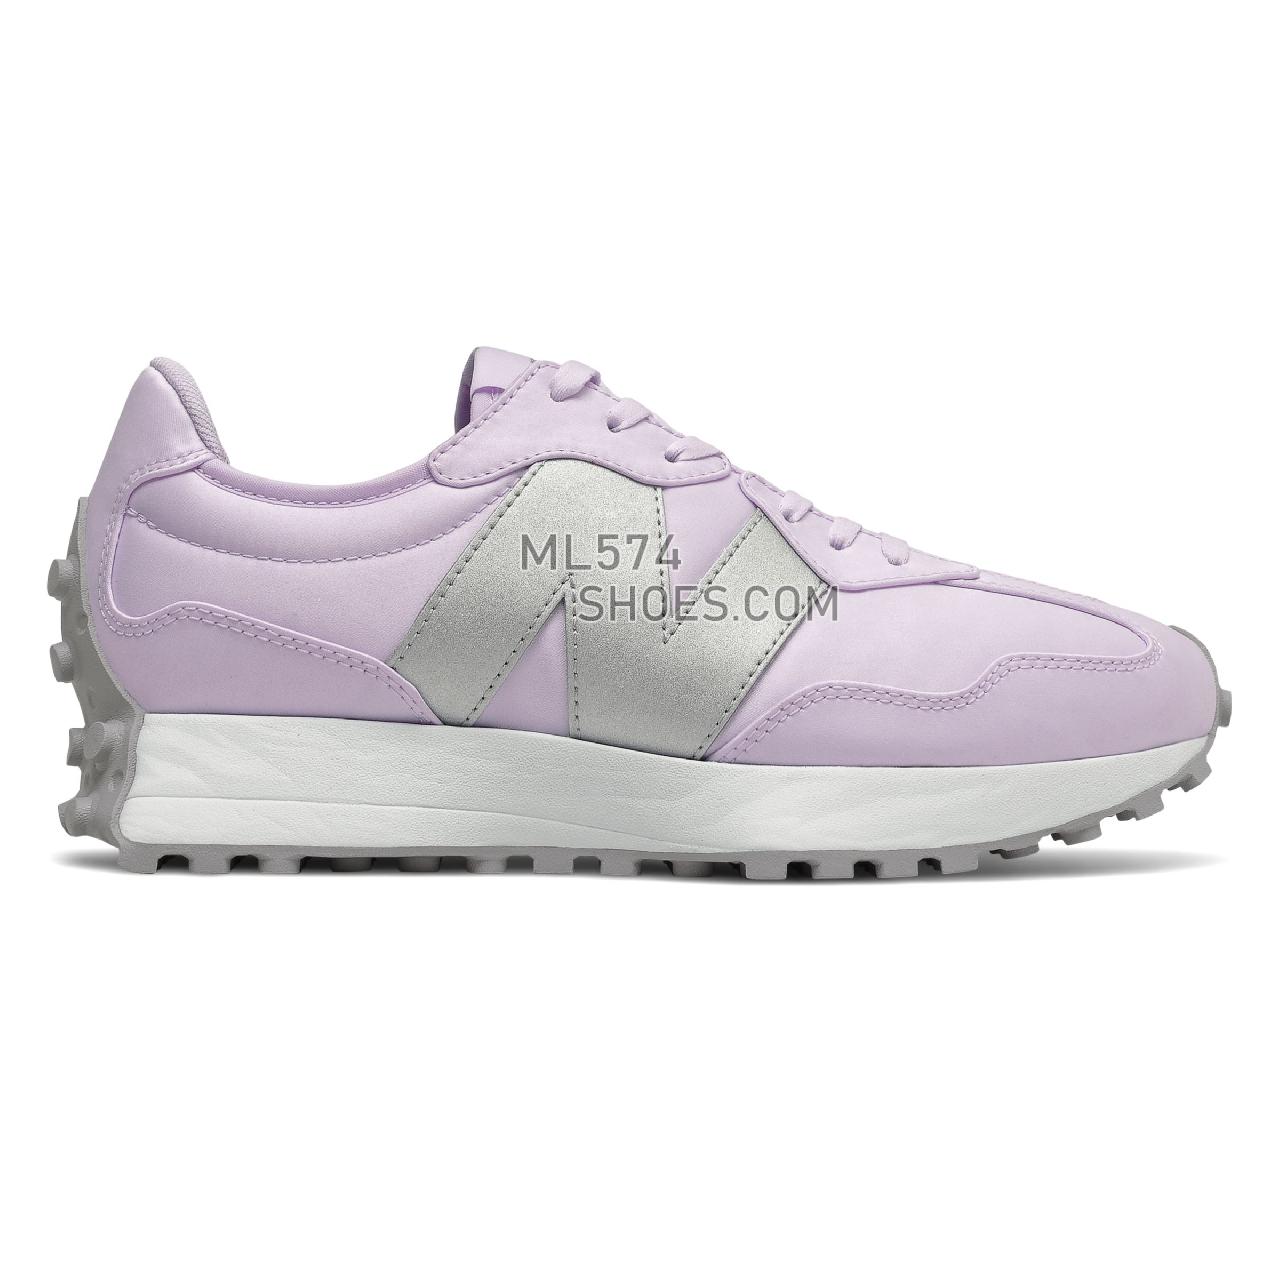 New Balance 327 - Women's Sport Style Sneakers - Astral Glow with Whisper Grey - WS327MS1